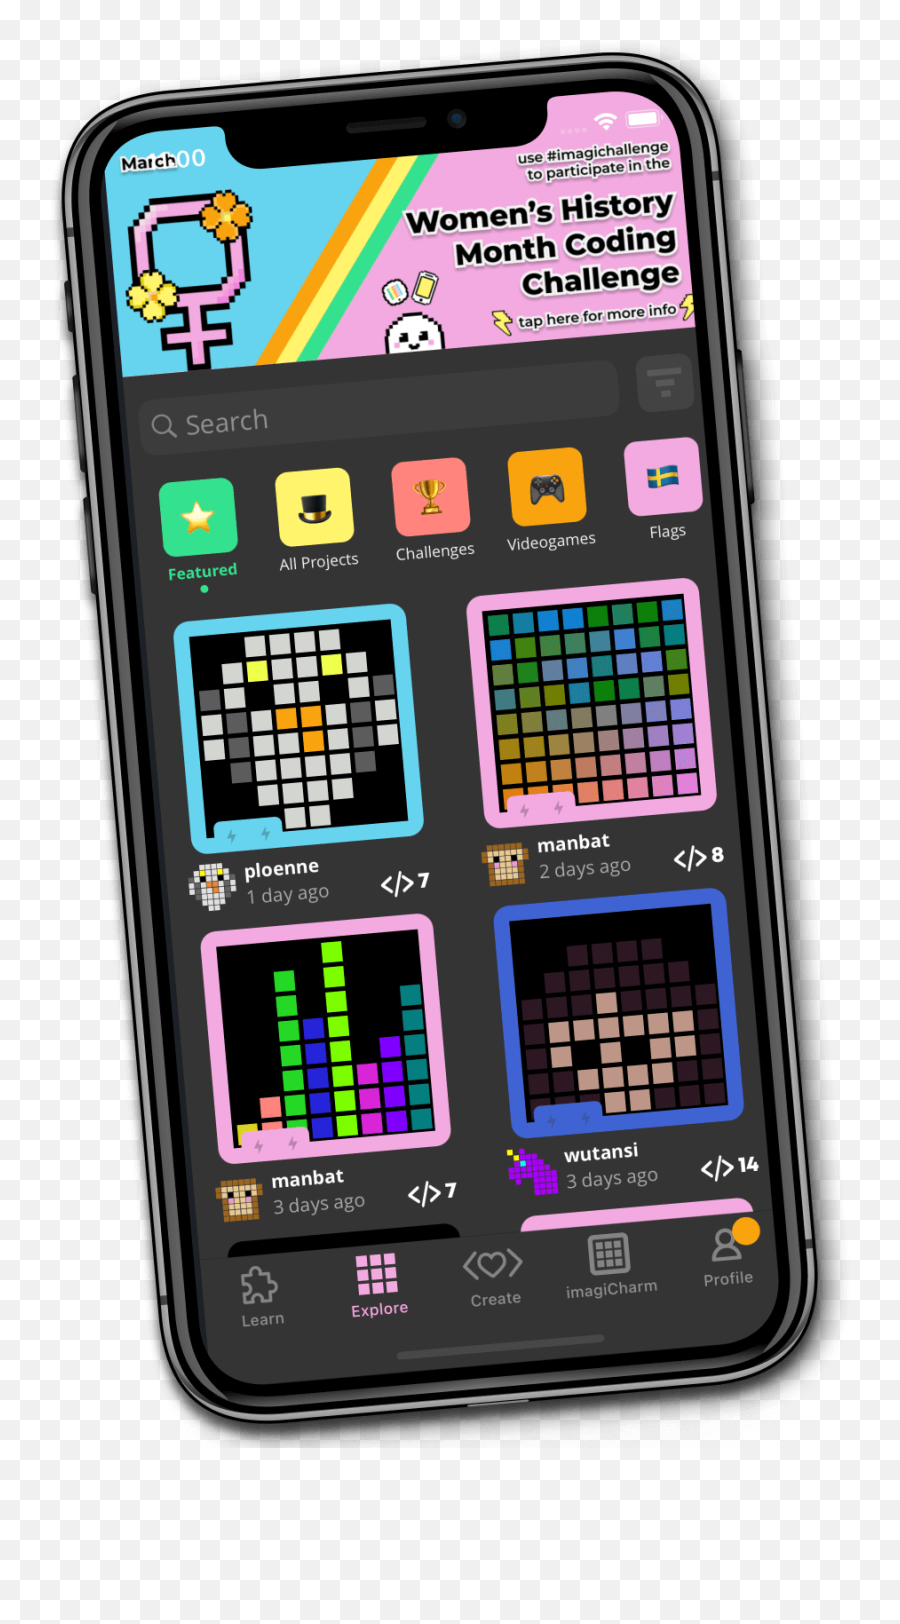 Imagilabs - Learn To Code On Your Phone And Create Your Own Dot Emoji,Iphone 6 Make Emojis Verbalize When Phone Rings